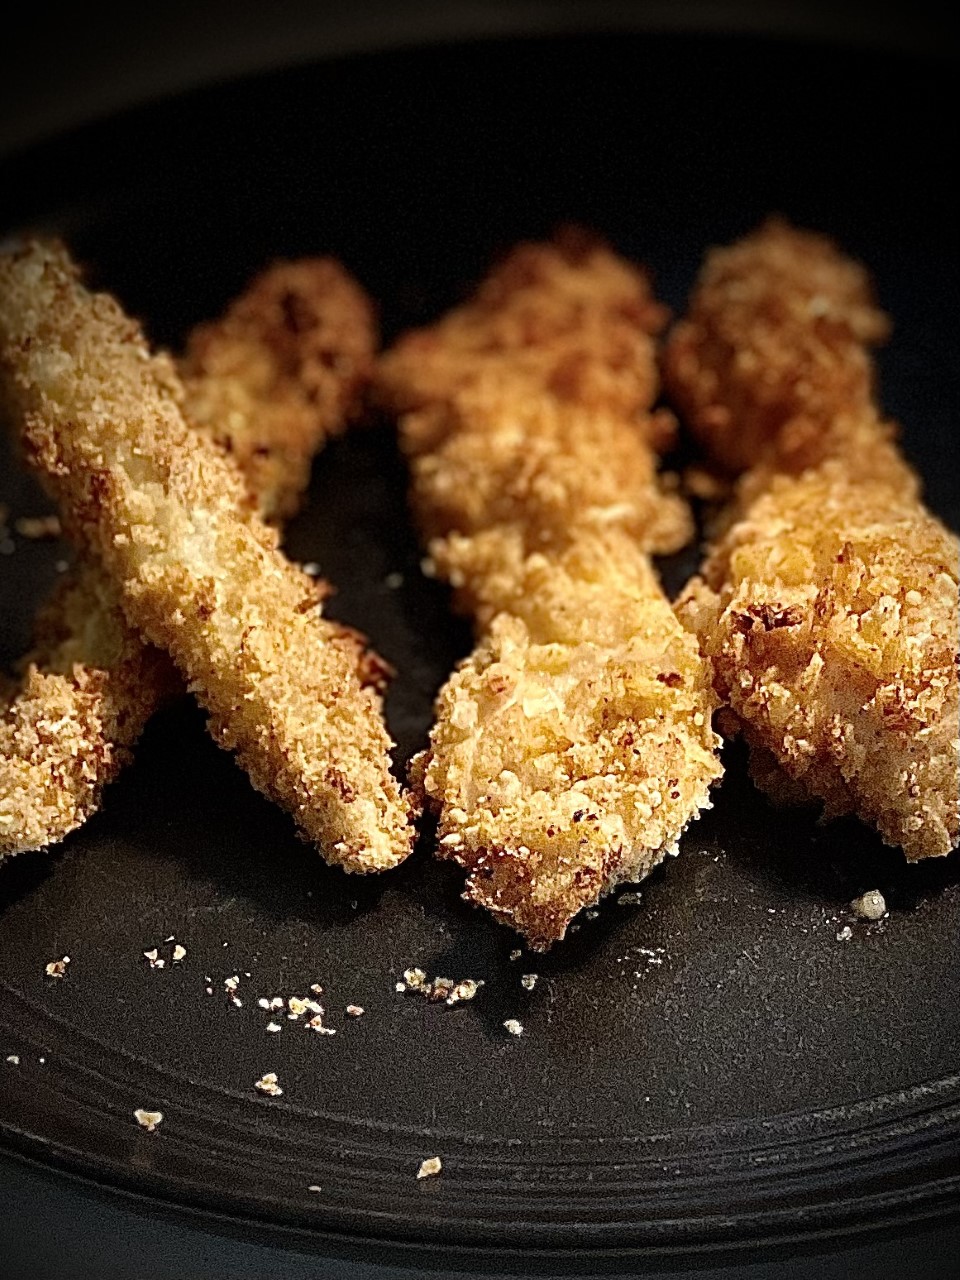 Crispy, Crunchy Baked Potato-Chip Crusted Chicken Tenders and Baked Breaded Pickles